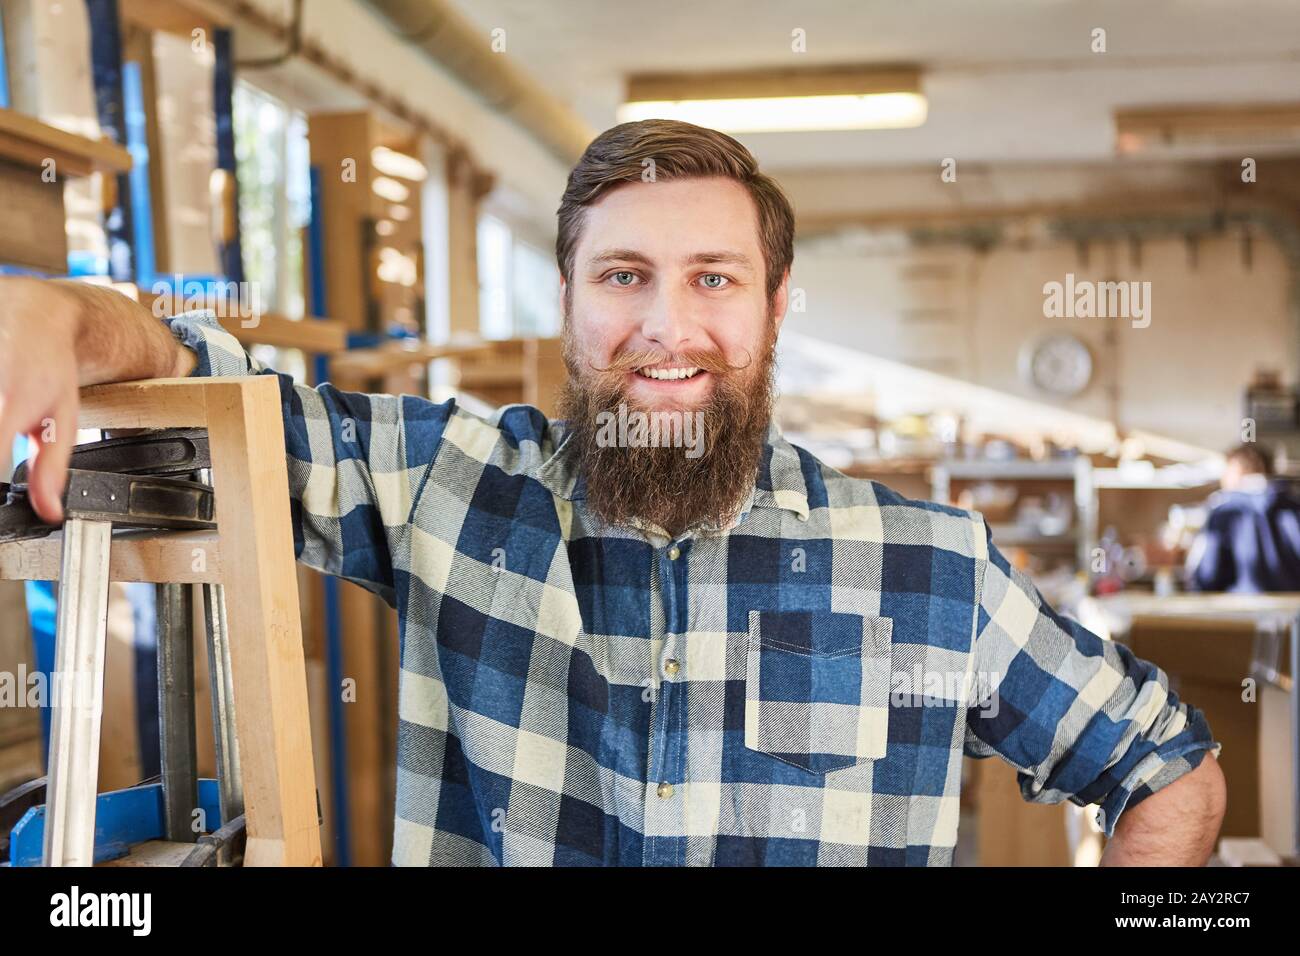 Young hipster man with a beard as a happy craftsman or founder Stock Photo